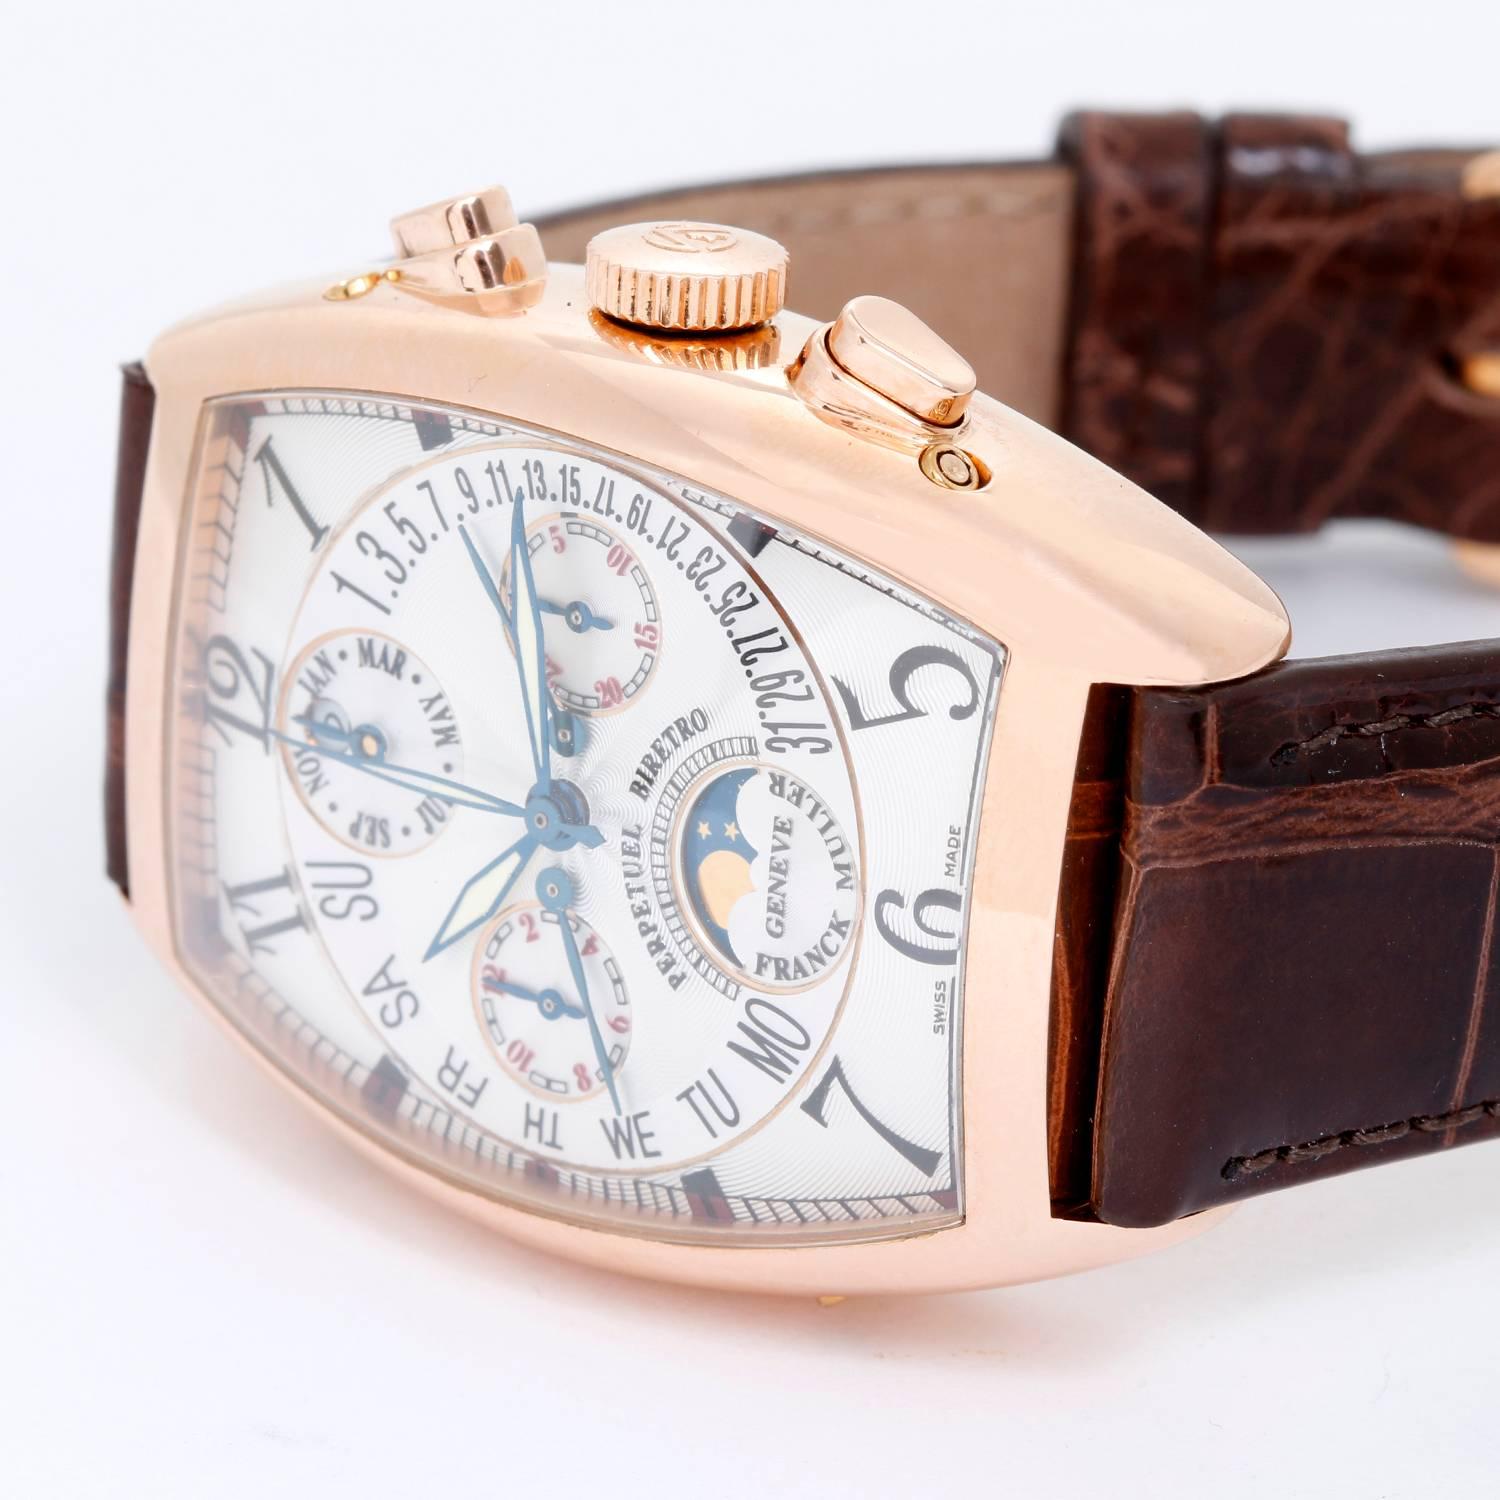 Franck Muller 18k Rose Gold Perpetual Moonphase Bi-Retro Chronograph 6850 -  Automatic. 18K Rose Gold ( 31 mm x 40 mm ). Tonneau silver color dial with black Arabic numerals; two retrograde date and day indicators, four subsidiary dials for month/